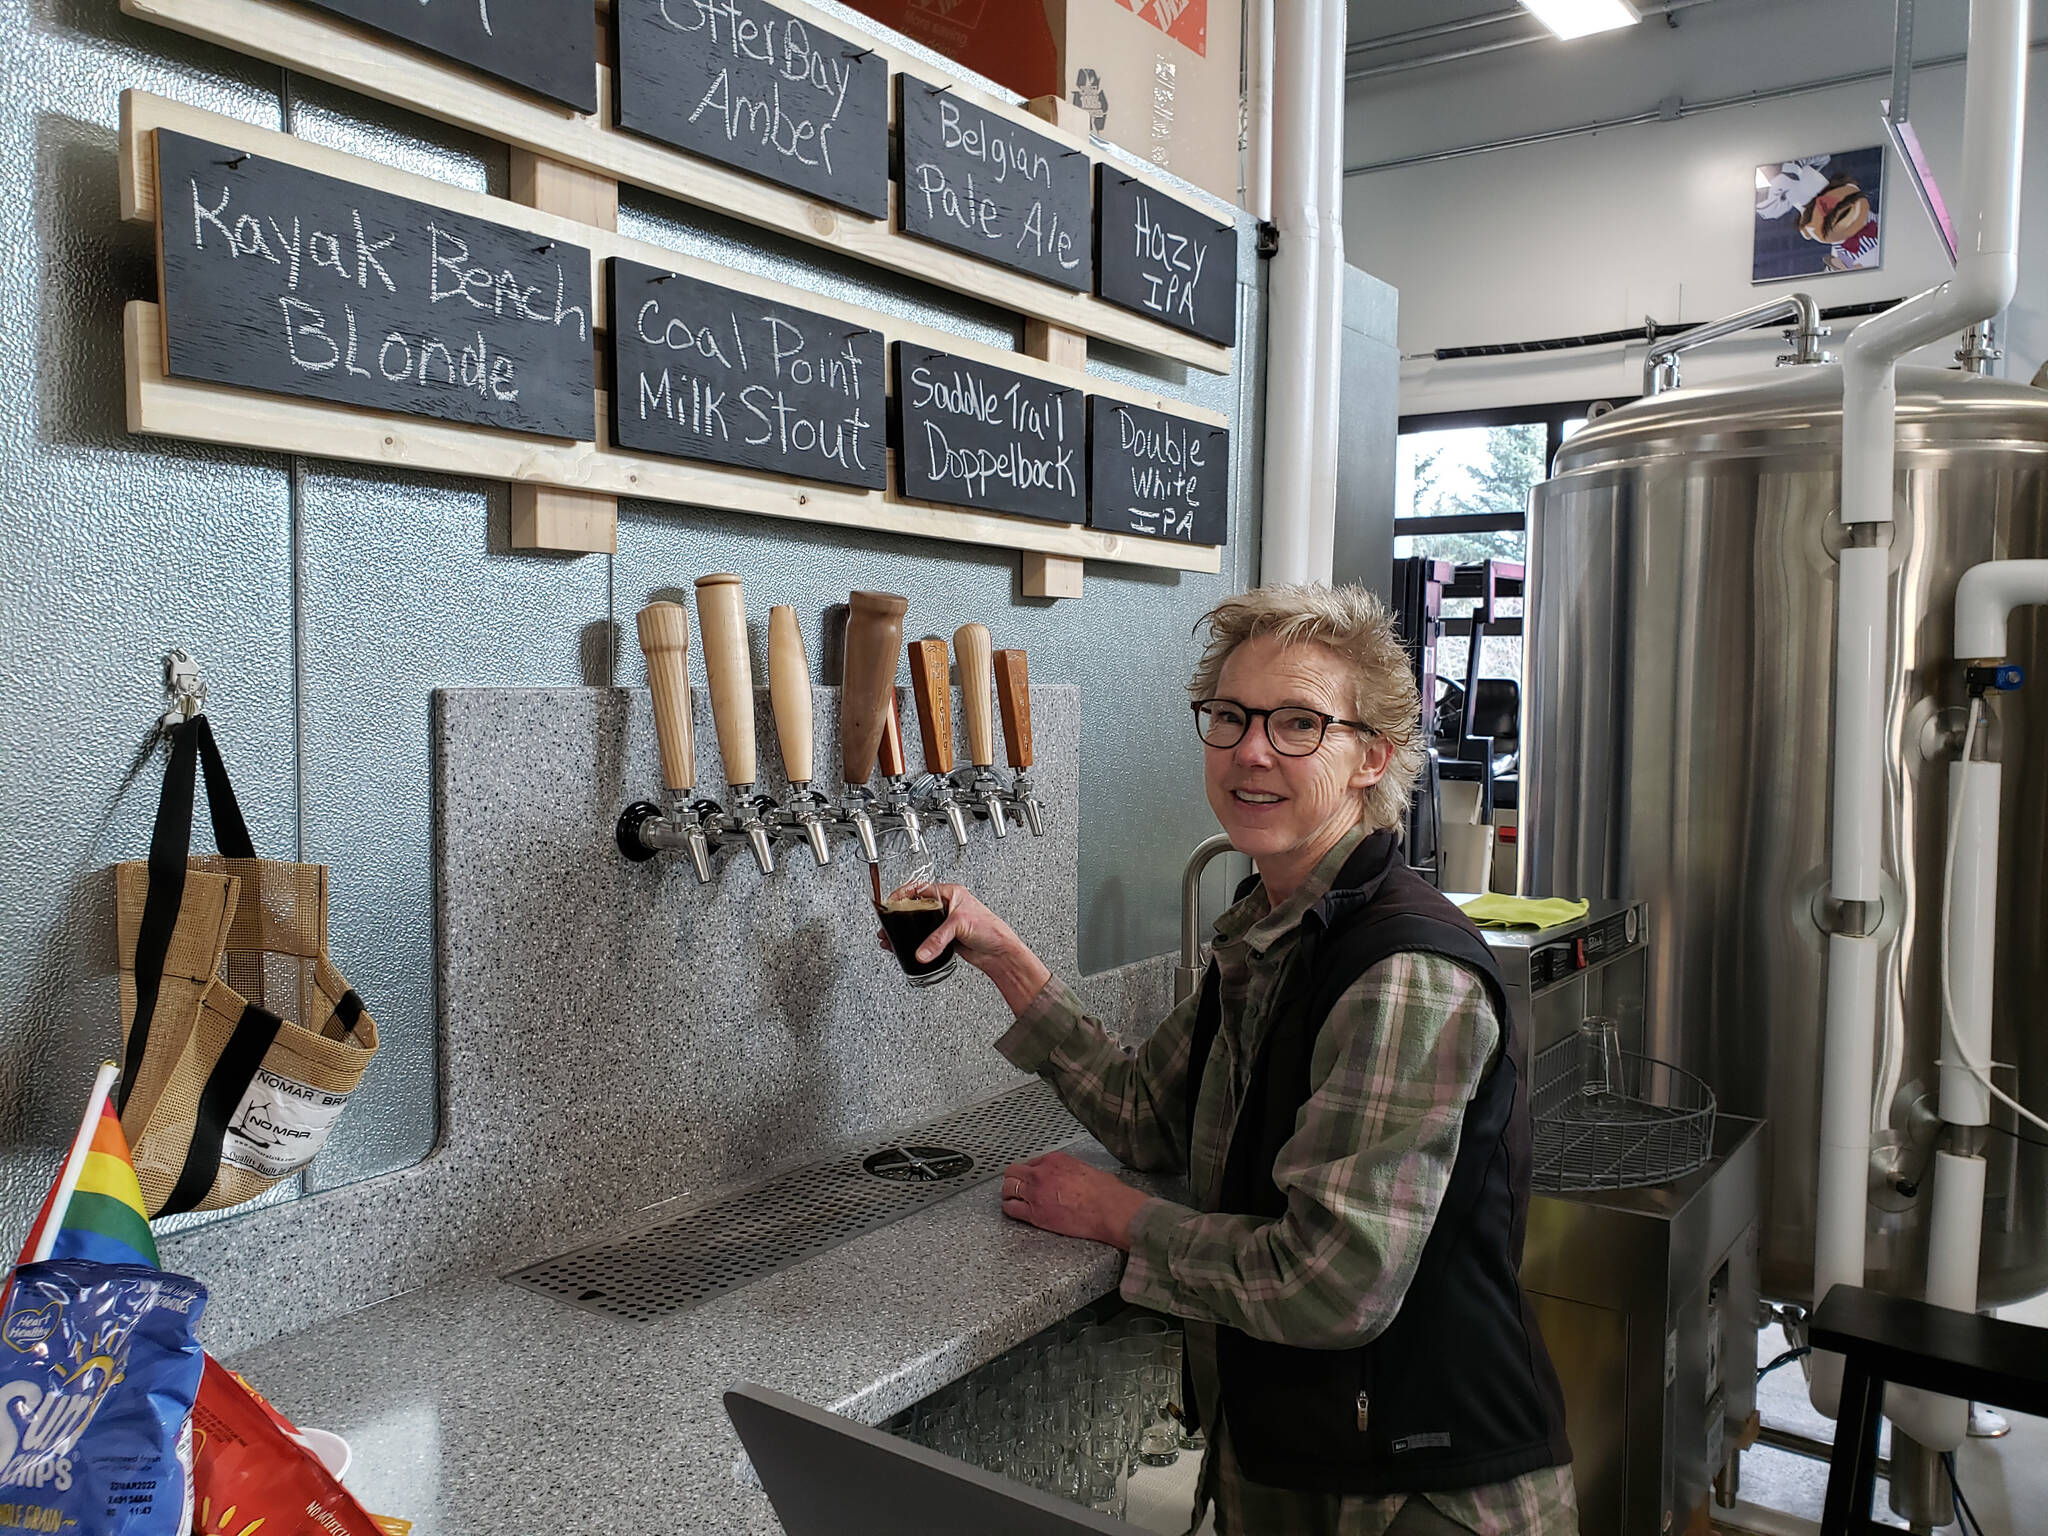 Grace Ridge Brewing co-owner Sherry Stead. (Photo provided)